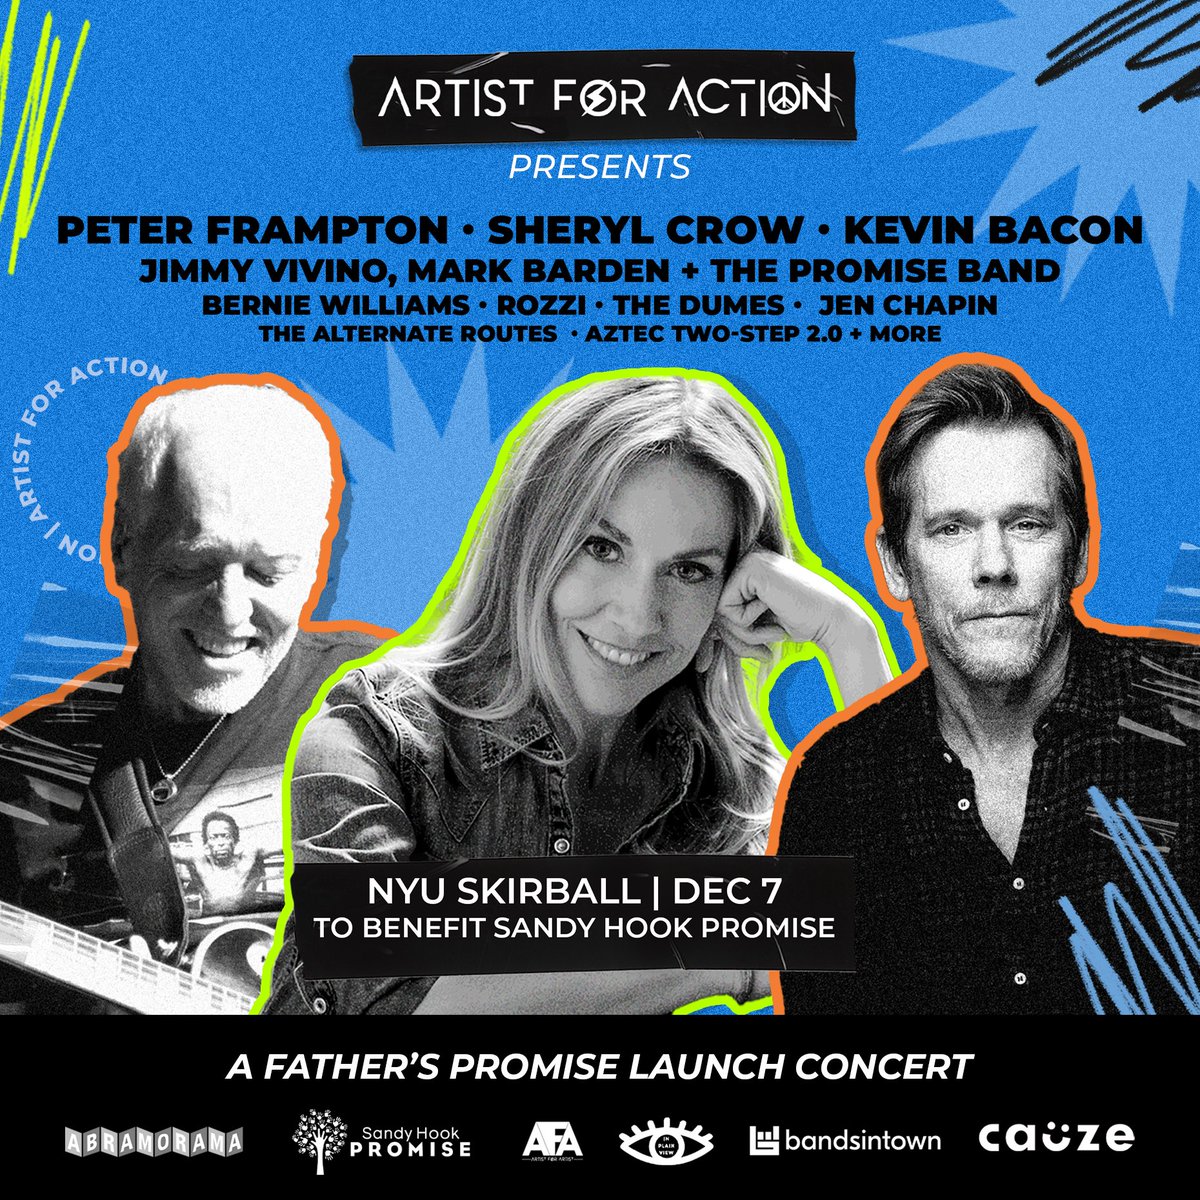 So honored to be a part of Artist for Action @afaventures Dec 7 in NYC to support @markbardenSHP and @sandyhook . @SherylCrow @peterframpton and now @kevinbacon and other greats performing found.ee/nyutickets